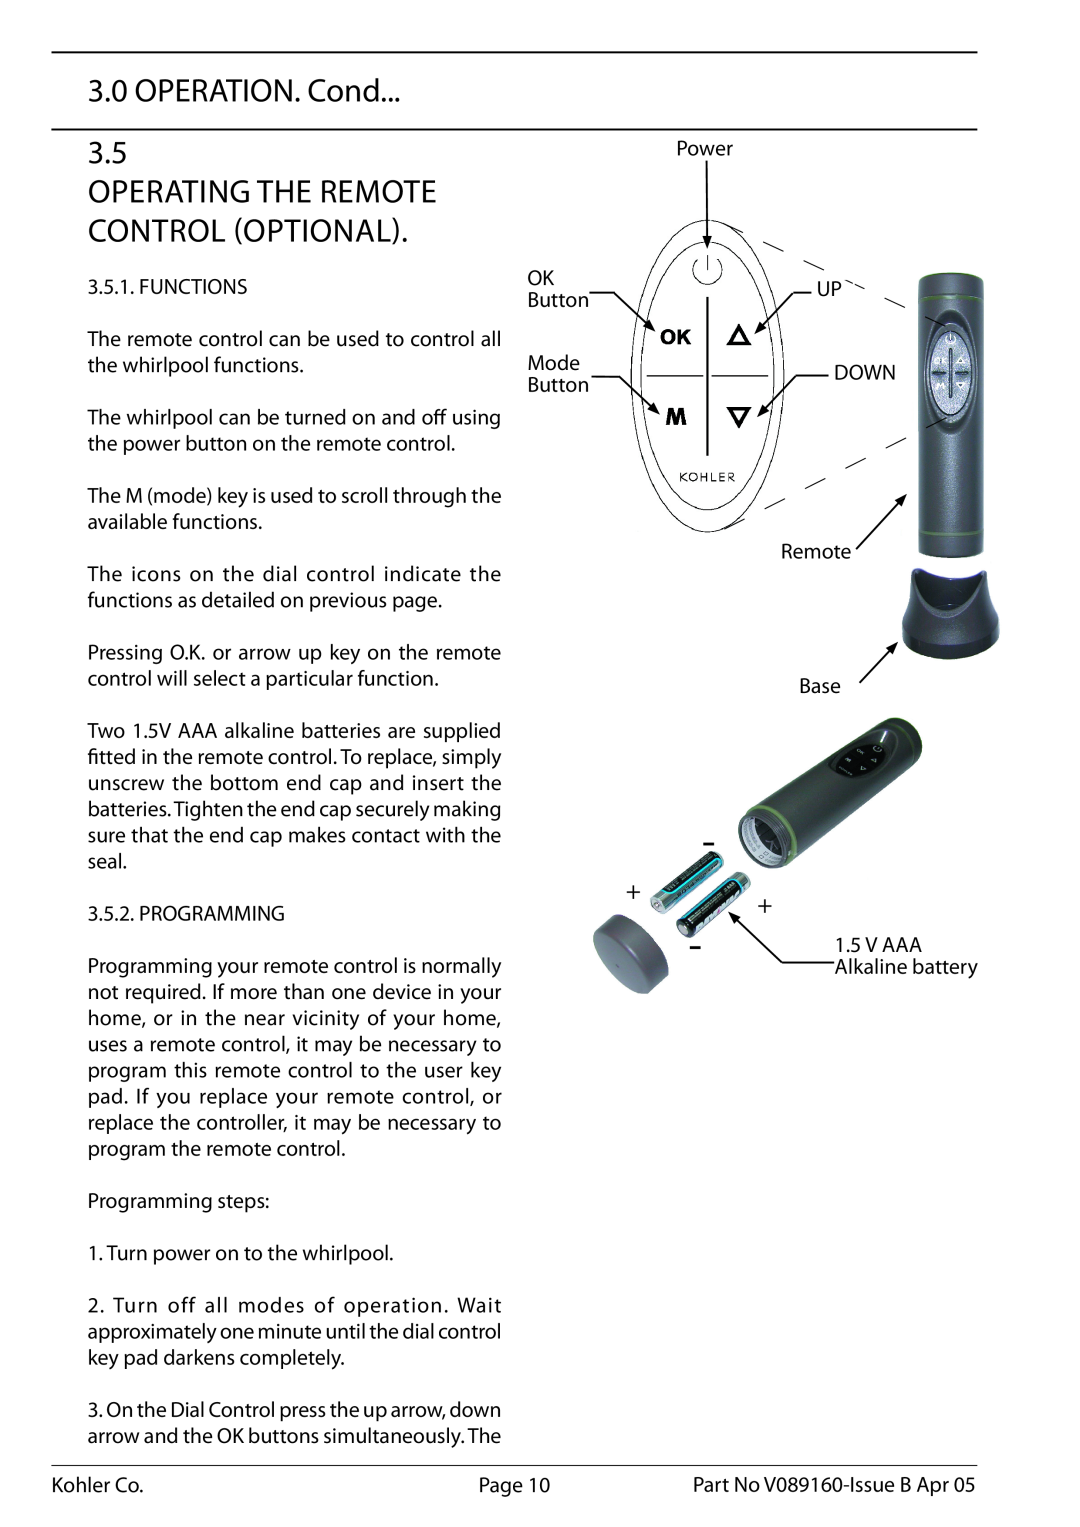 Kohler V089160, K-1110-CT-0 installation instructions OPERATION. Cond, Operating The Remote Control Optional 